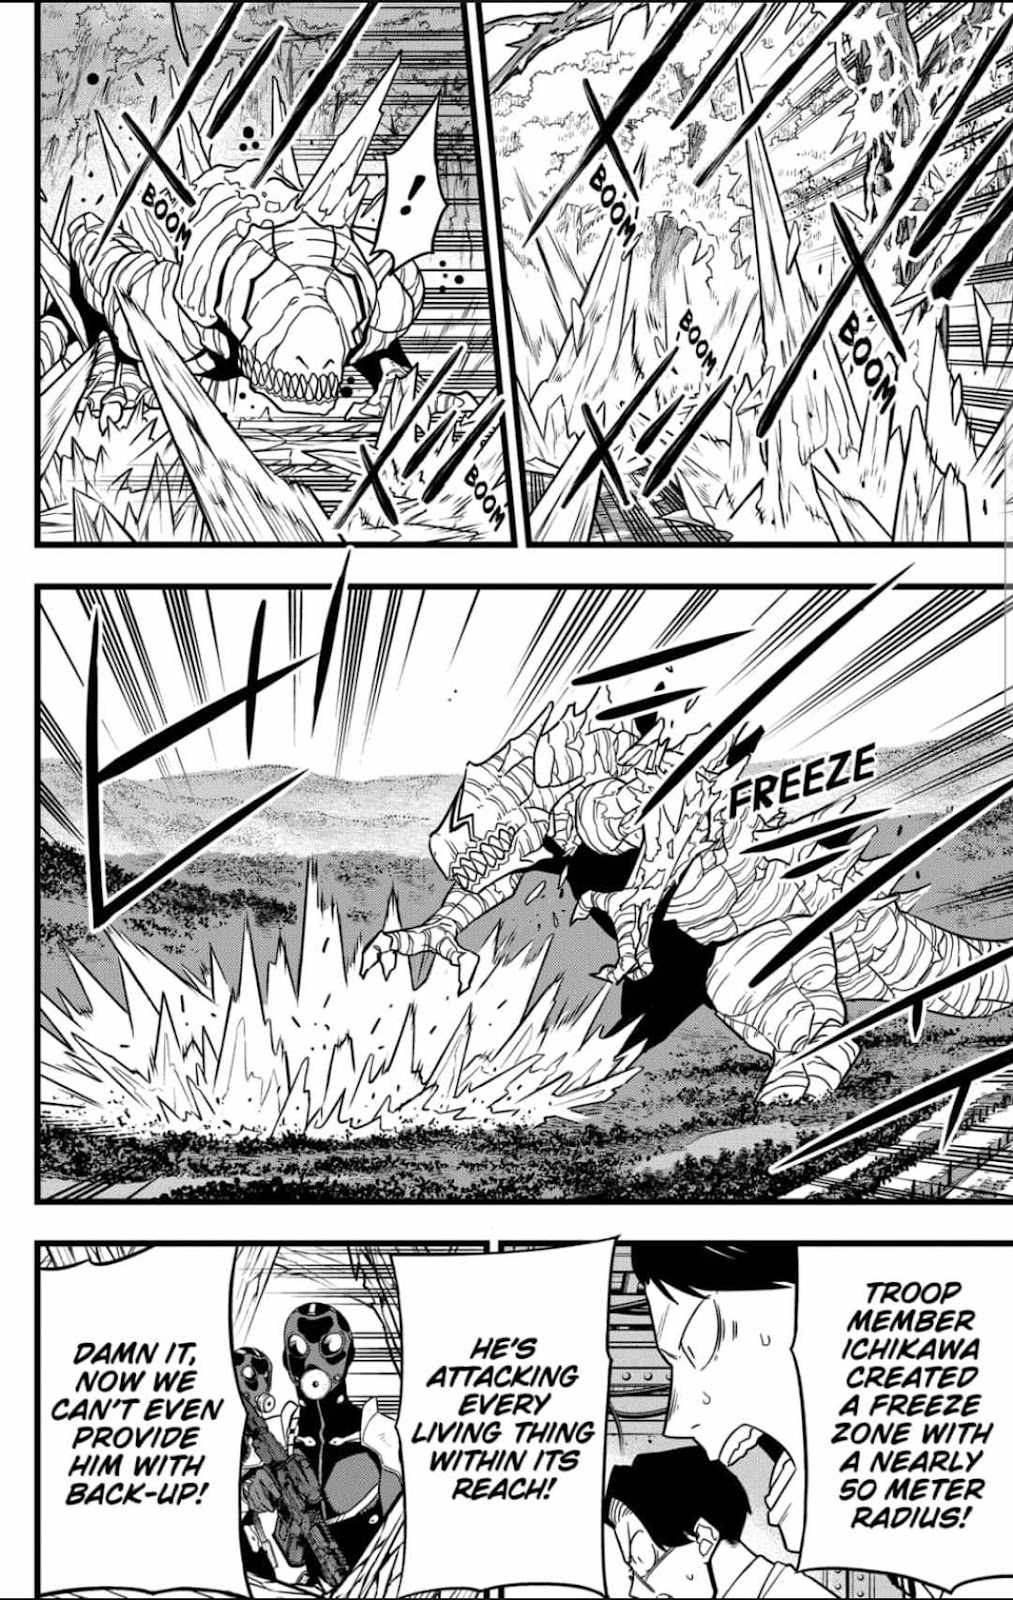 Kaiju no 8 Chapter 62, monster #8 chapter 62